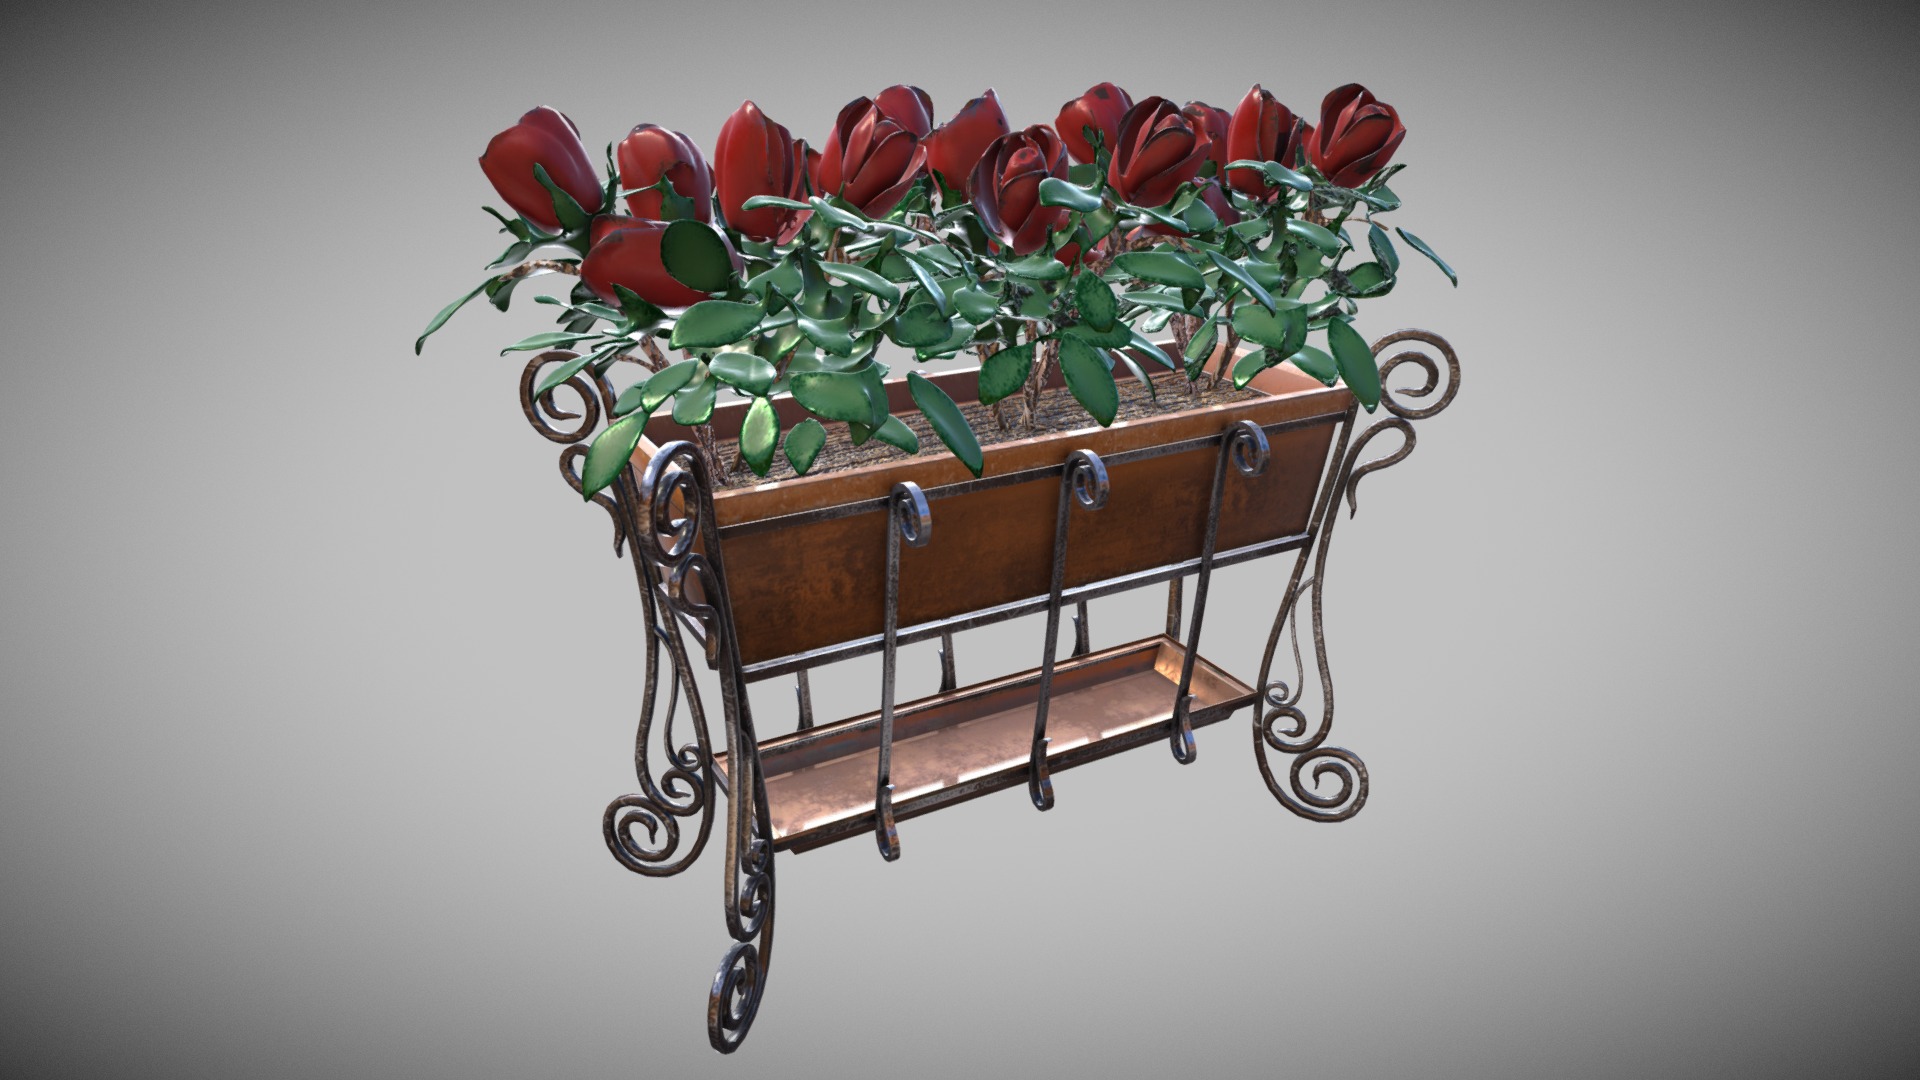 3D model Rose Garden Set – Square Support - This is a 3D model of the Rose Garden Set - Square Support. The 3D model is about a basket of roses.